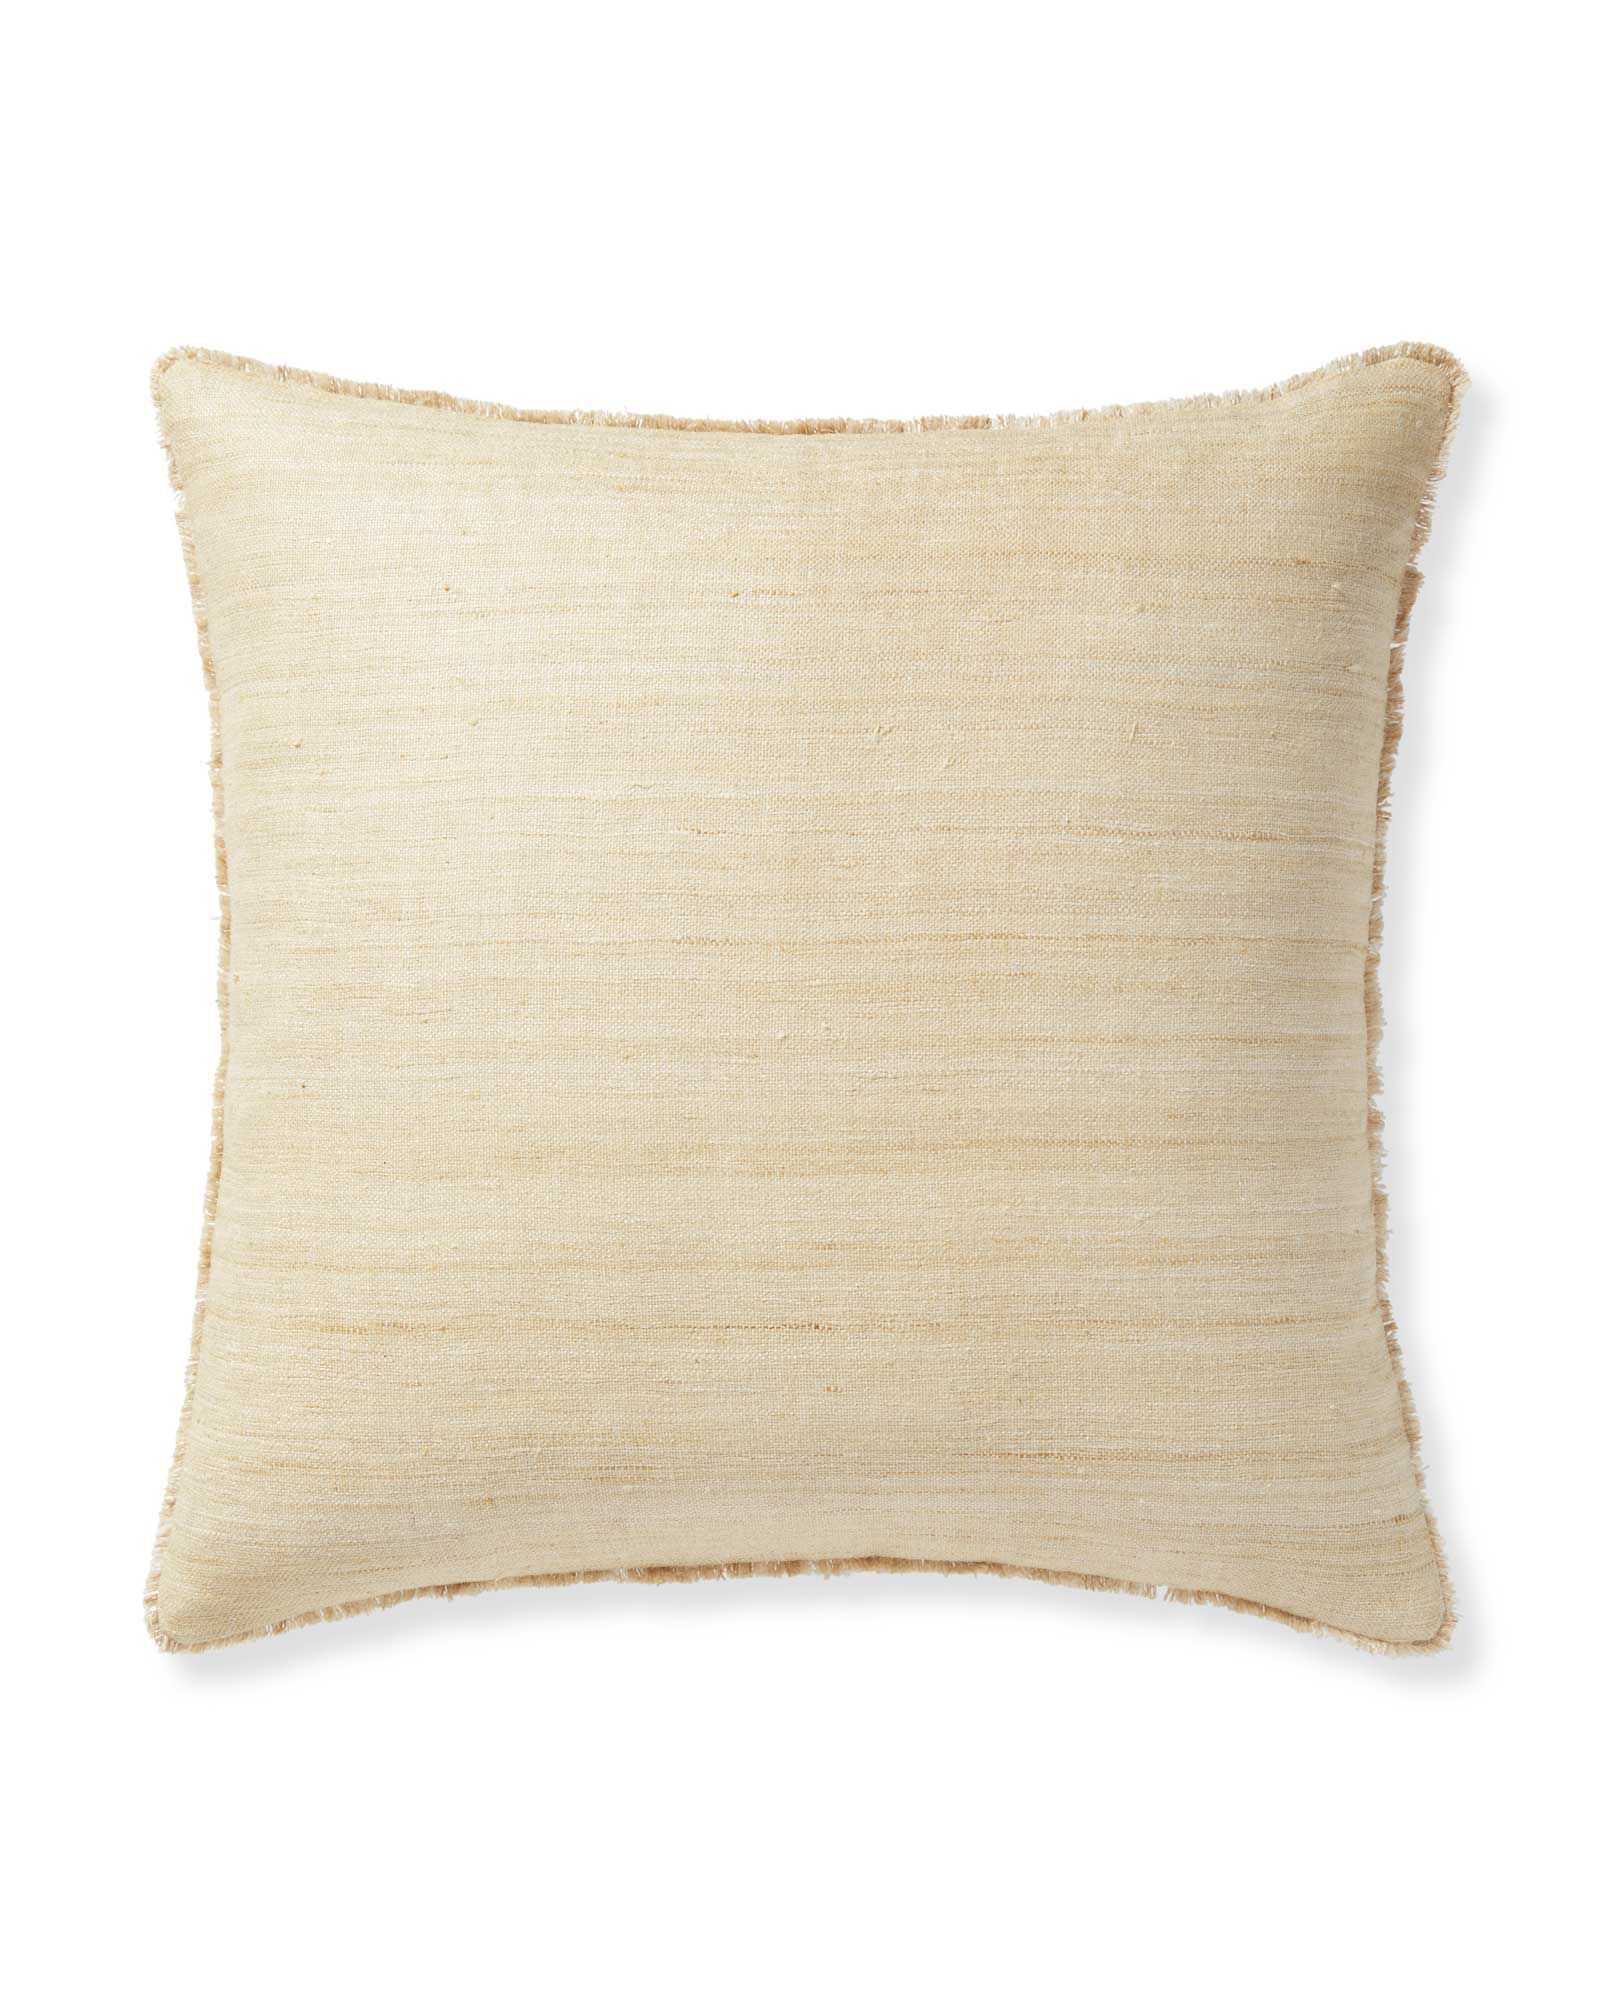 Wiltshire Raw Silk Pillow Cover | Serena and Lily